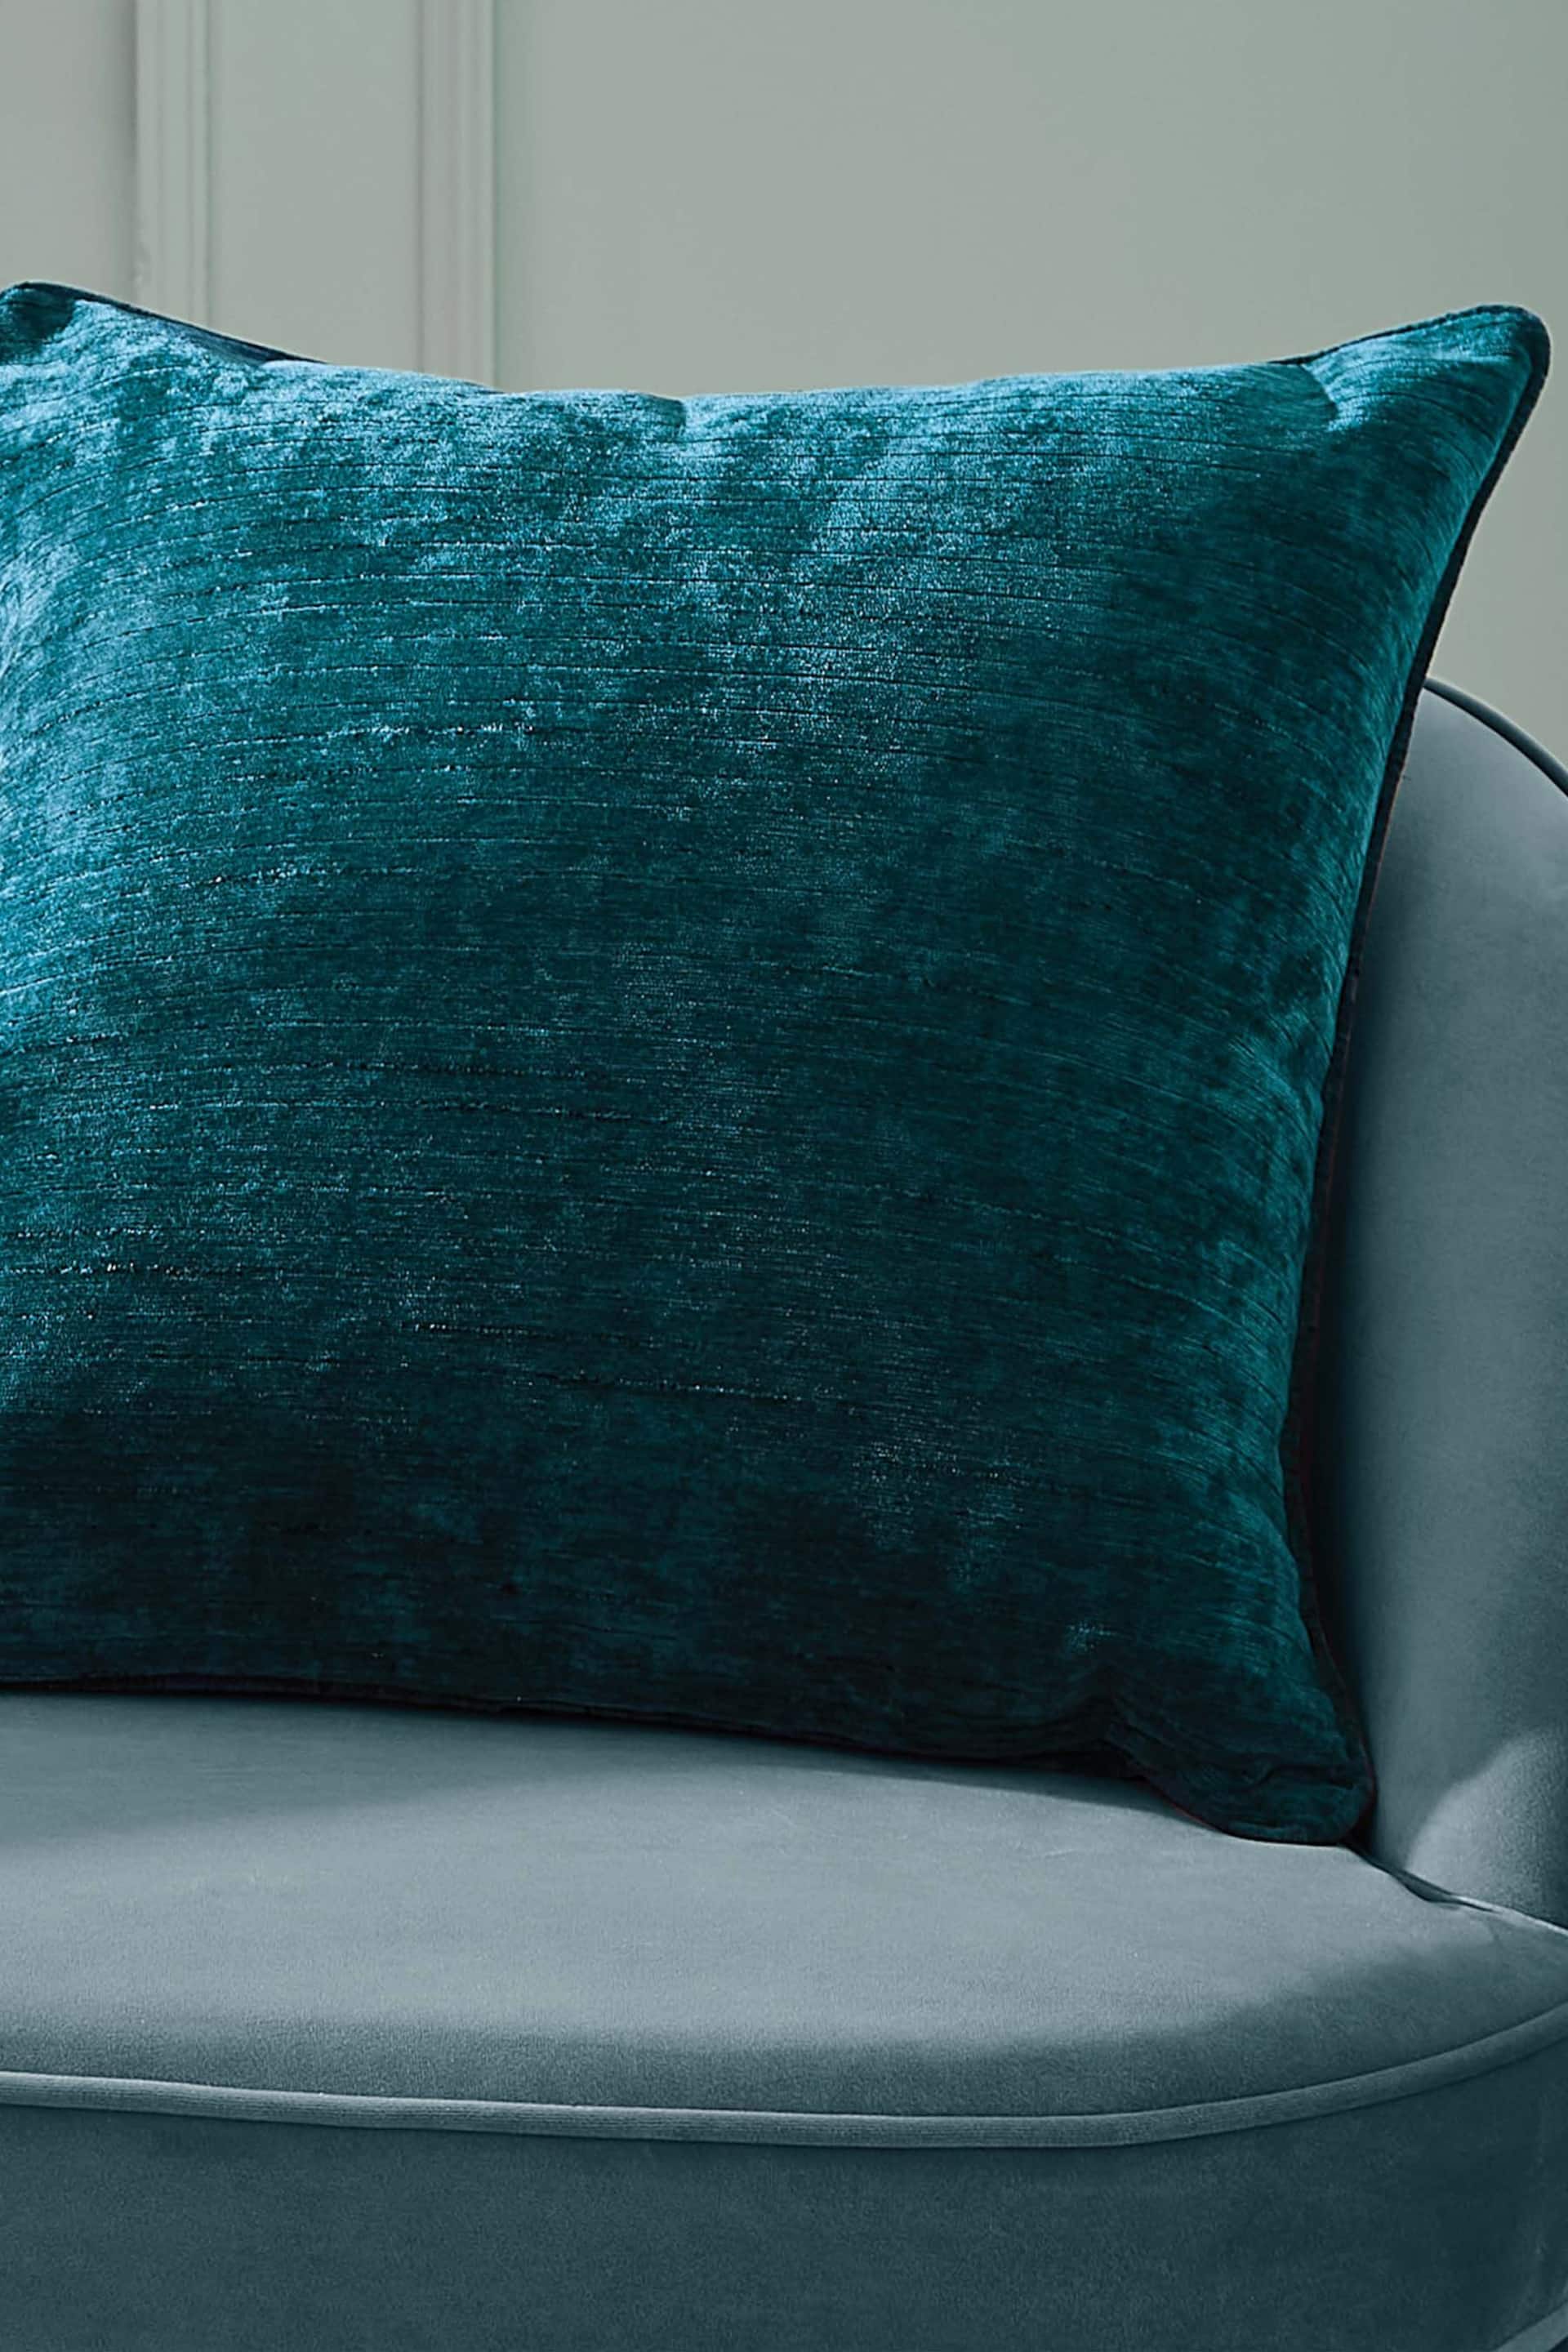 Hyperion Rich Teal Blue Selene Luxury Chenille Piped Cushion - Image 1 of 3